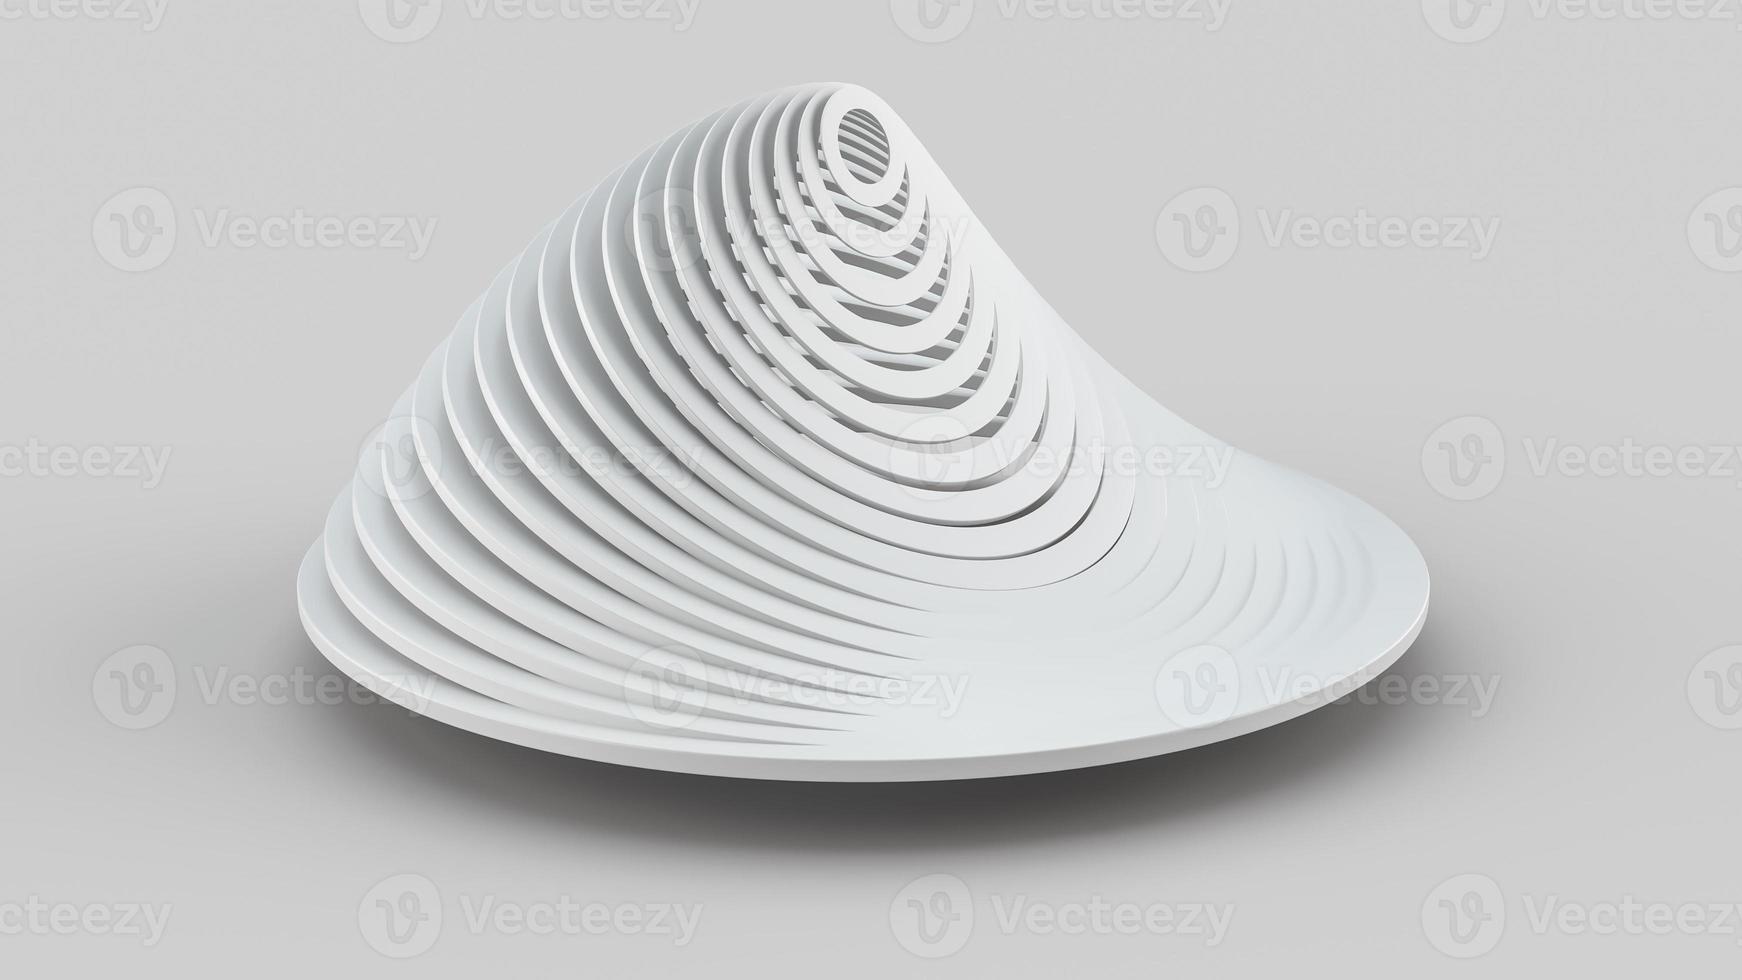 Abstract art of surreal swirl infinity twisted round shape in light grey matte plastic material white background Monochrome abstract 3d illustration photo